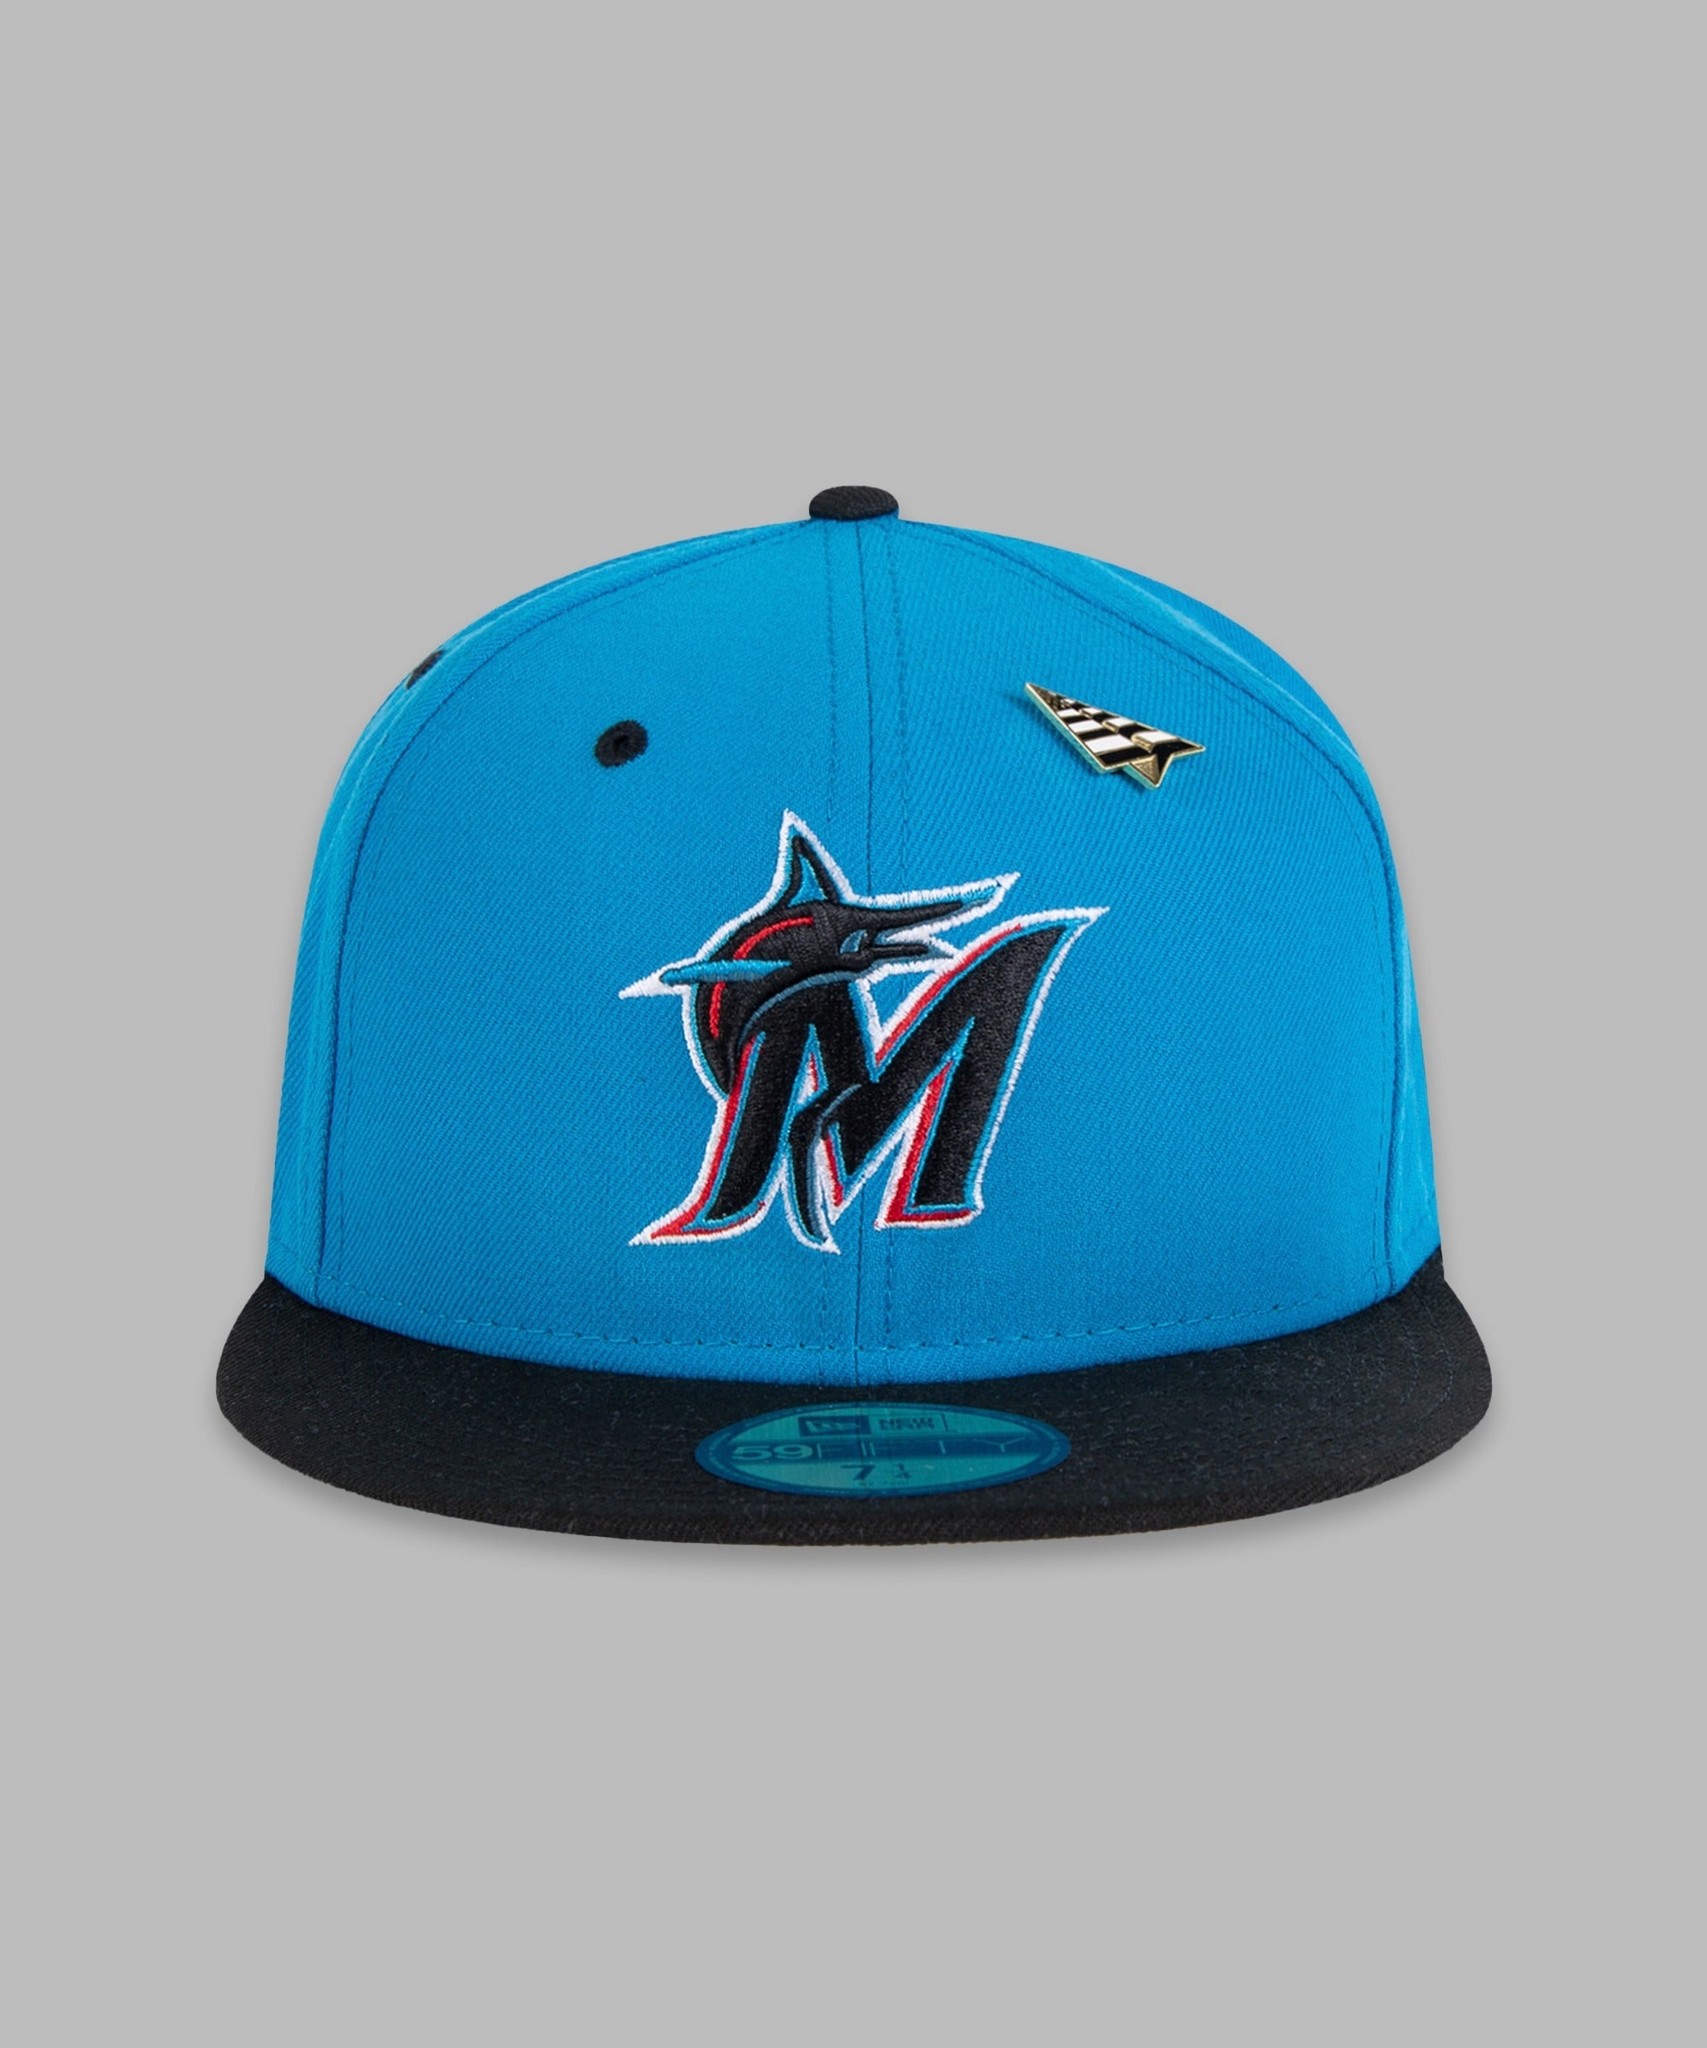 New Era Miami Marlins Teal Orange Two Tone Edition 59Fifty Fitted Hat